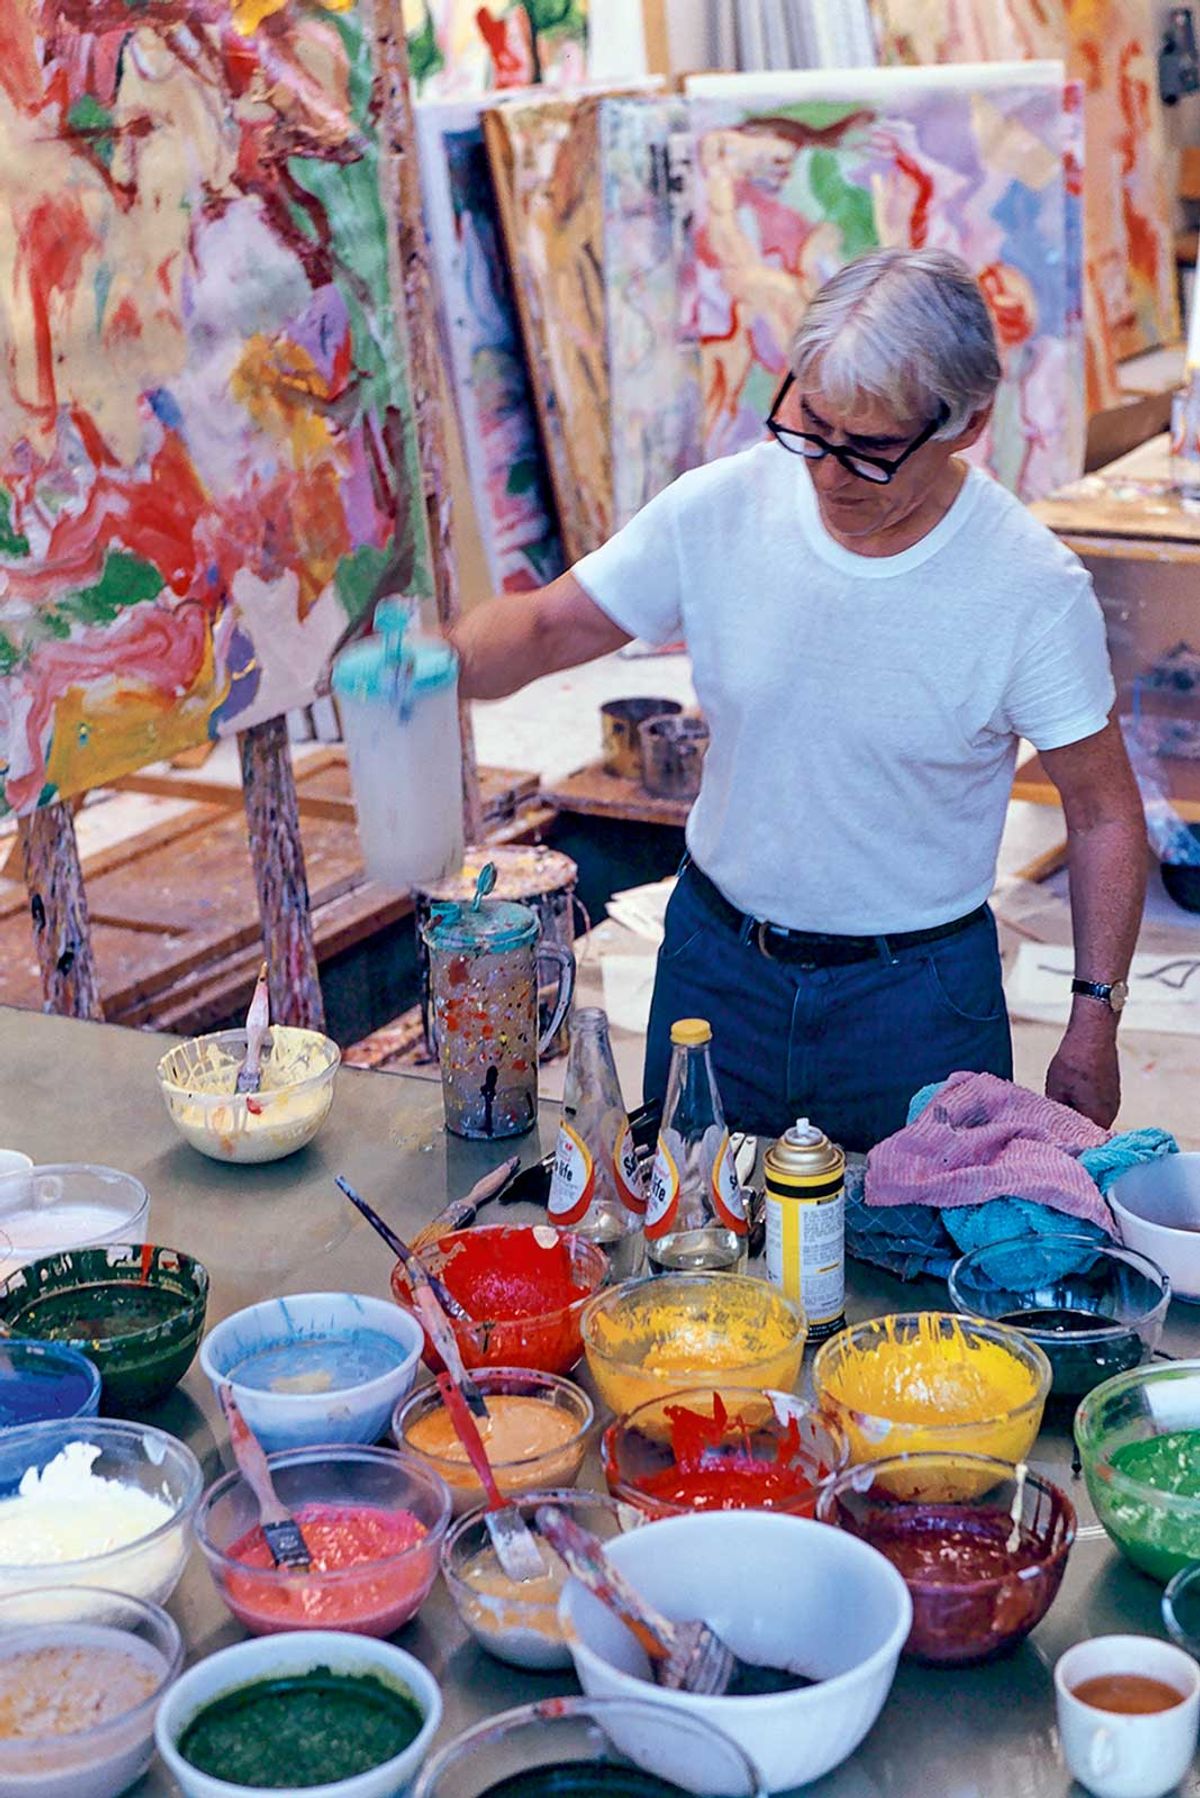 Willem de Kooning in his studio in New York in 1971, soon after returning from his second visit to Italy

Photo: Dan Budnik © The Estate of Dan Budnik. Art: © The Willem de Kooning Foundation, SIAE